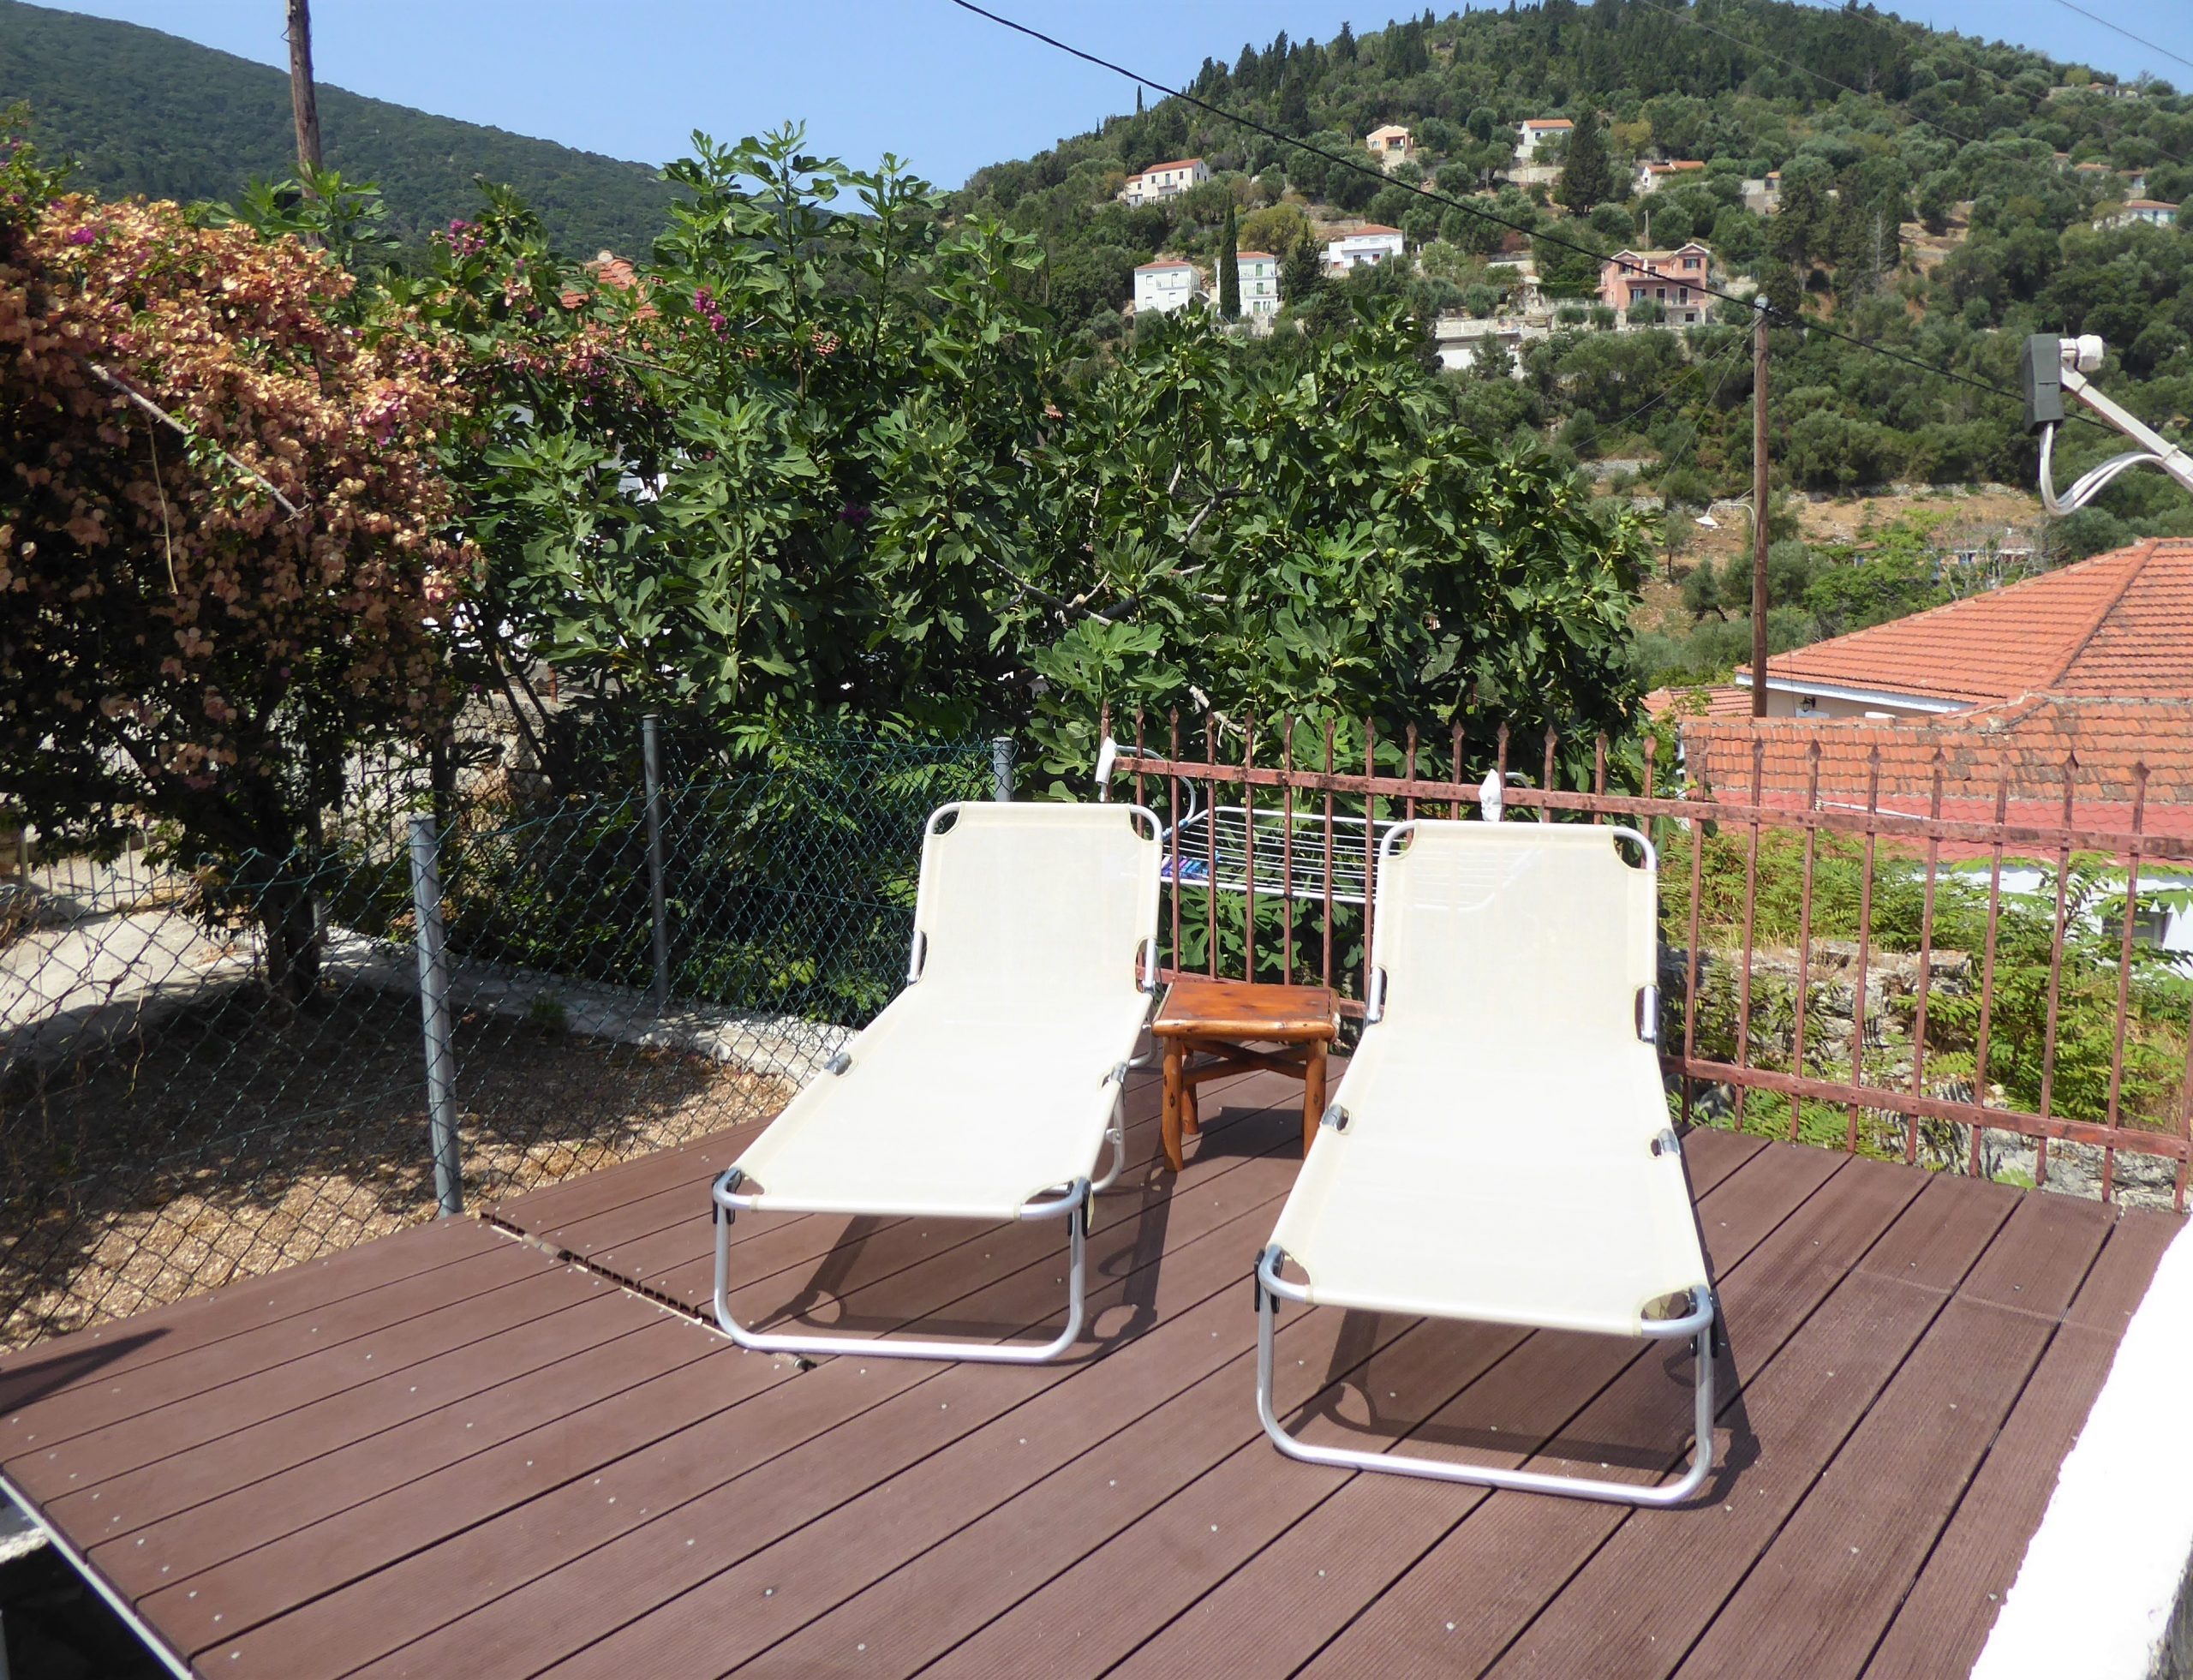 Wooden terrace of apartments for sale in Ithaca Greece, Kioni